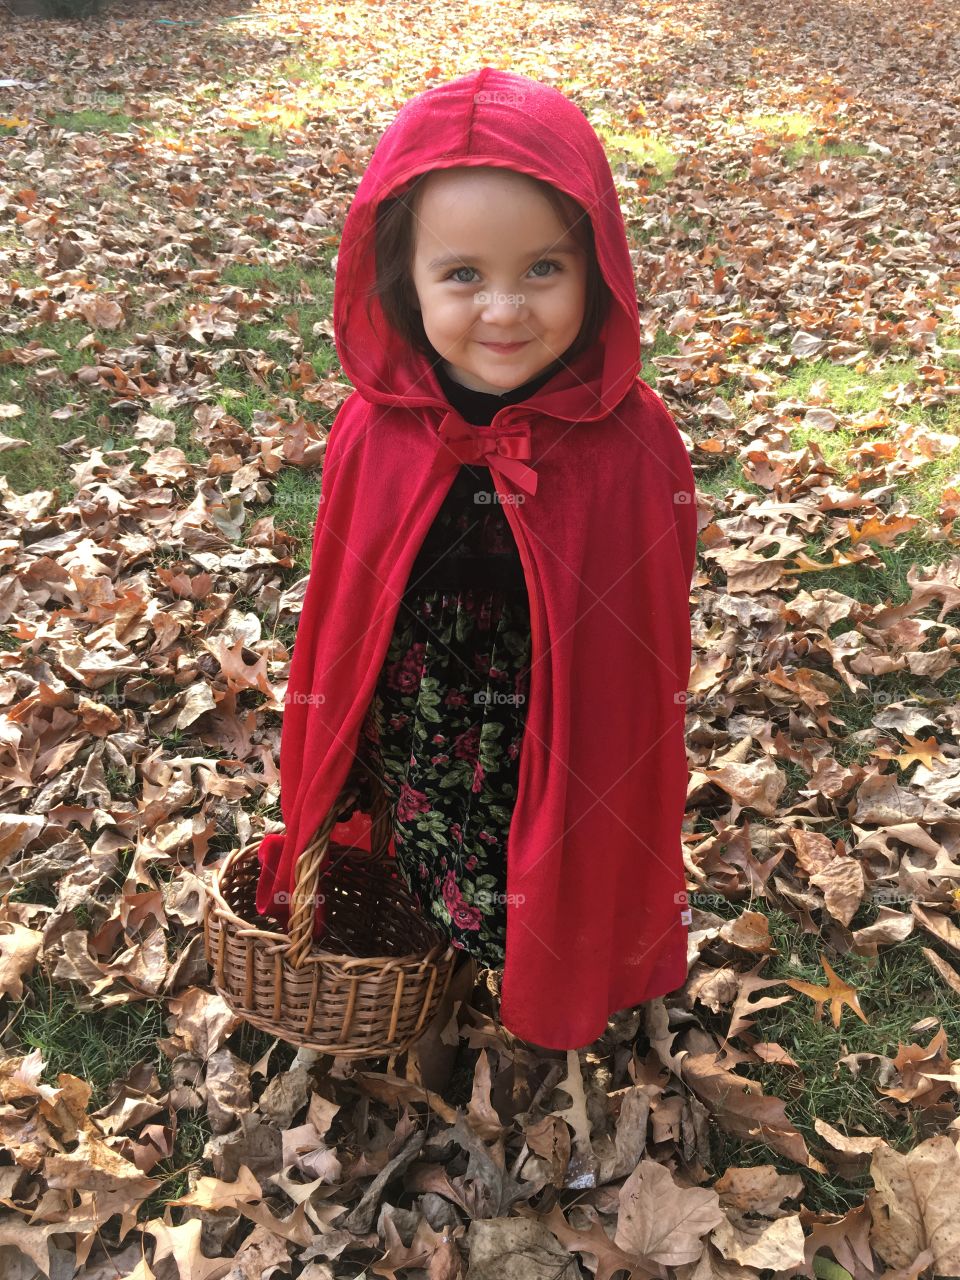 A young girl dressed like Little Red Riding Hood, holding a basket, amid autumn leaves